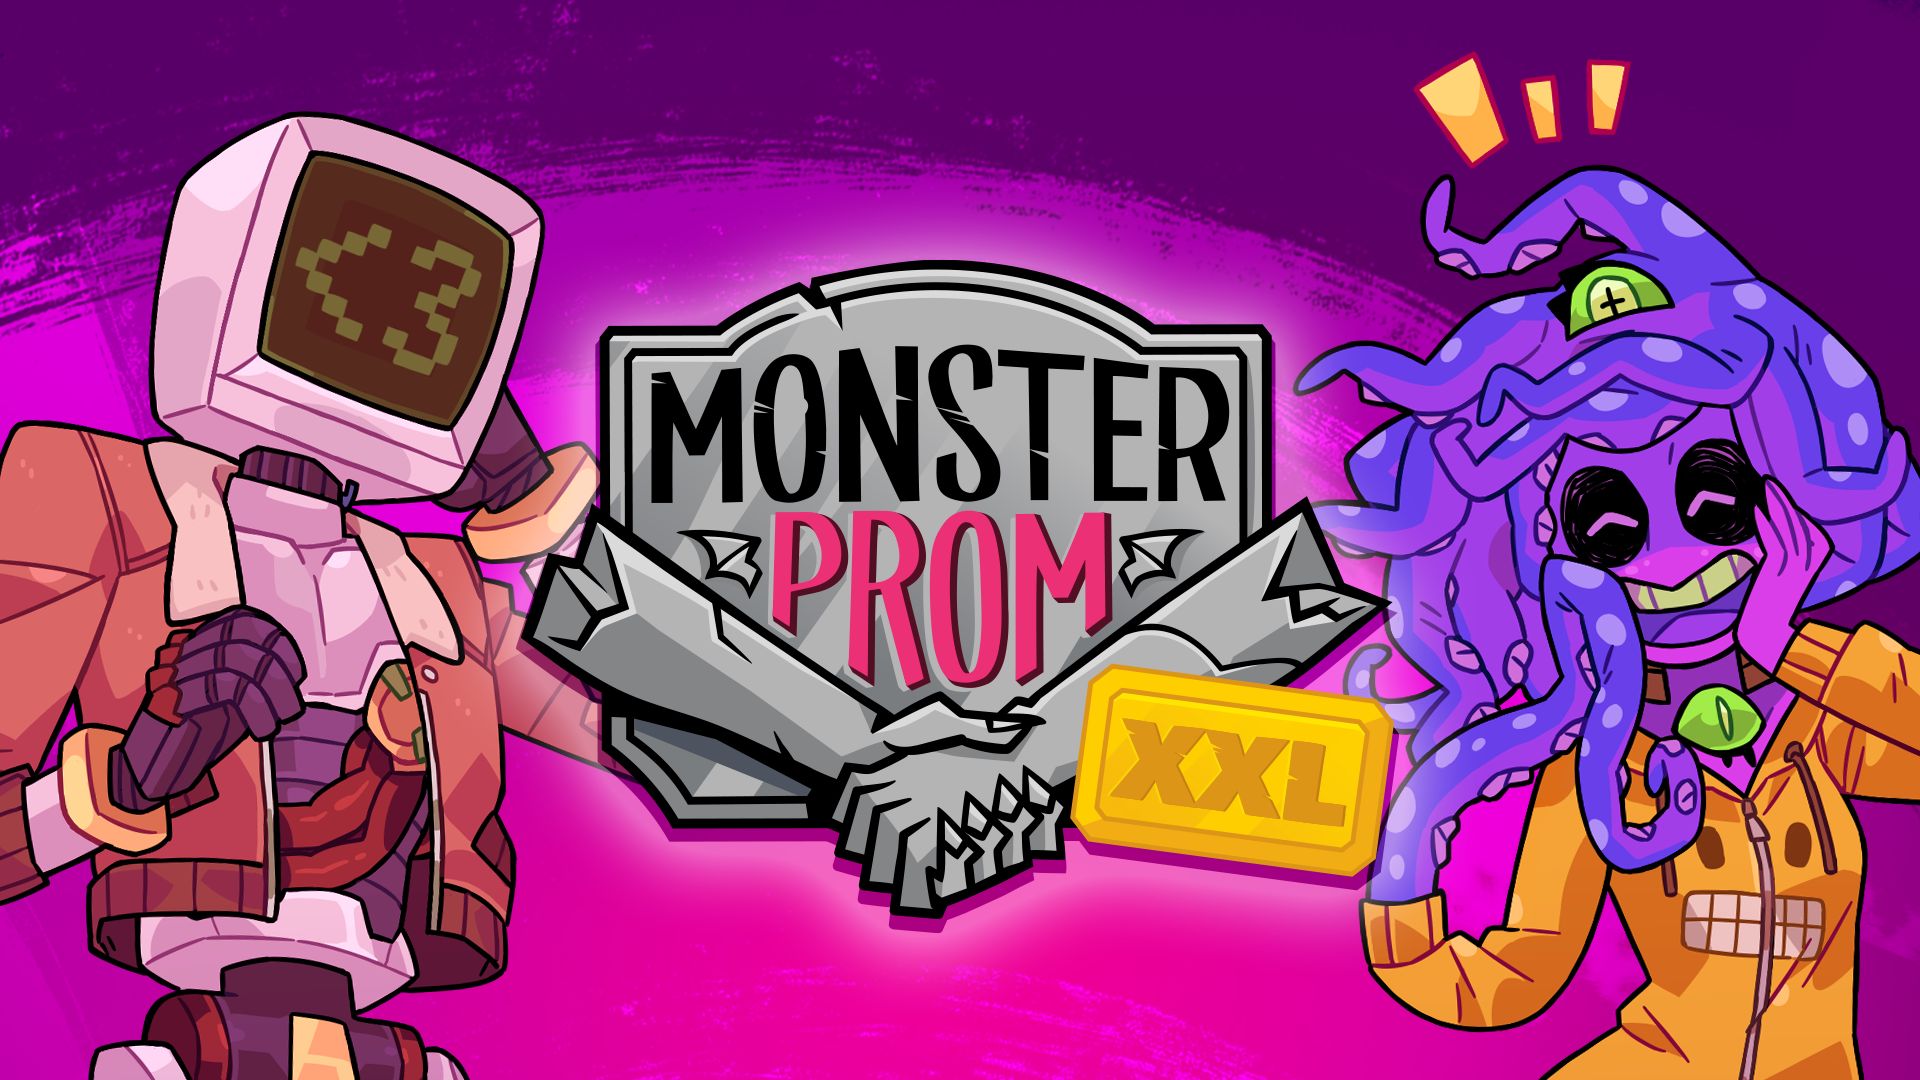 Video For Find New Love in Monster Prom: XXL, Available Now on Xbox One